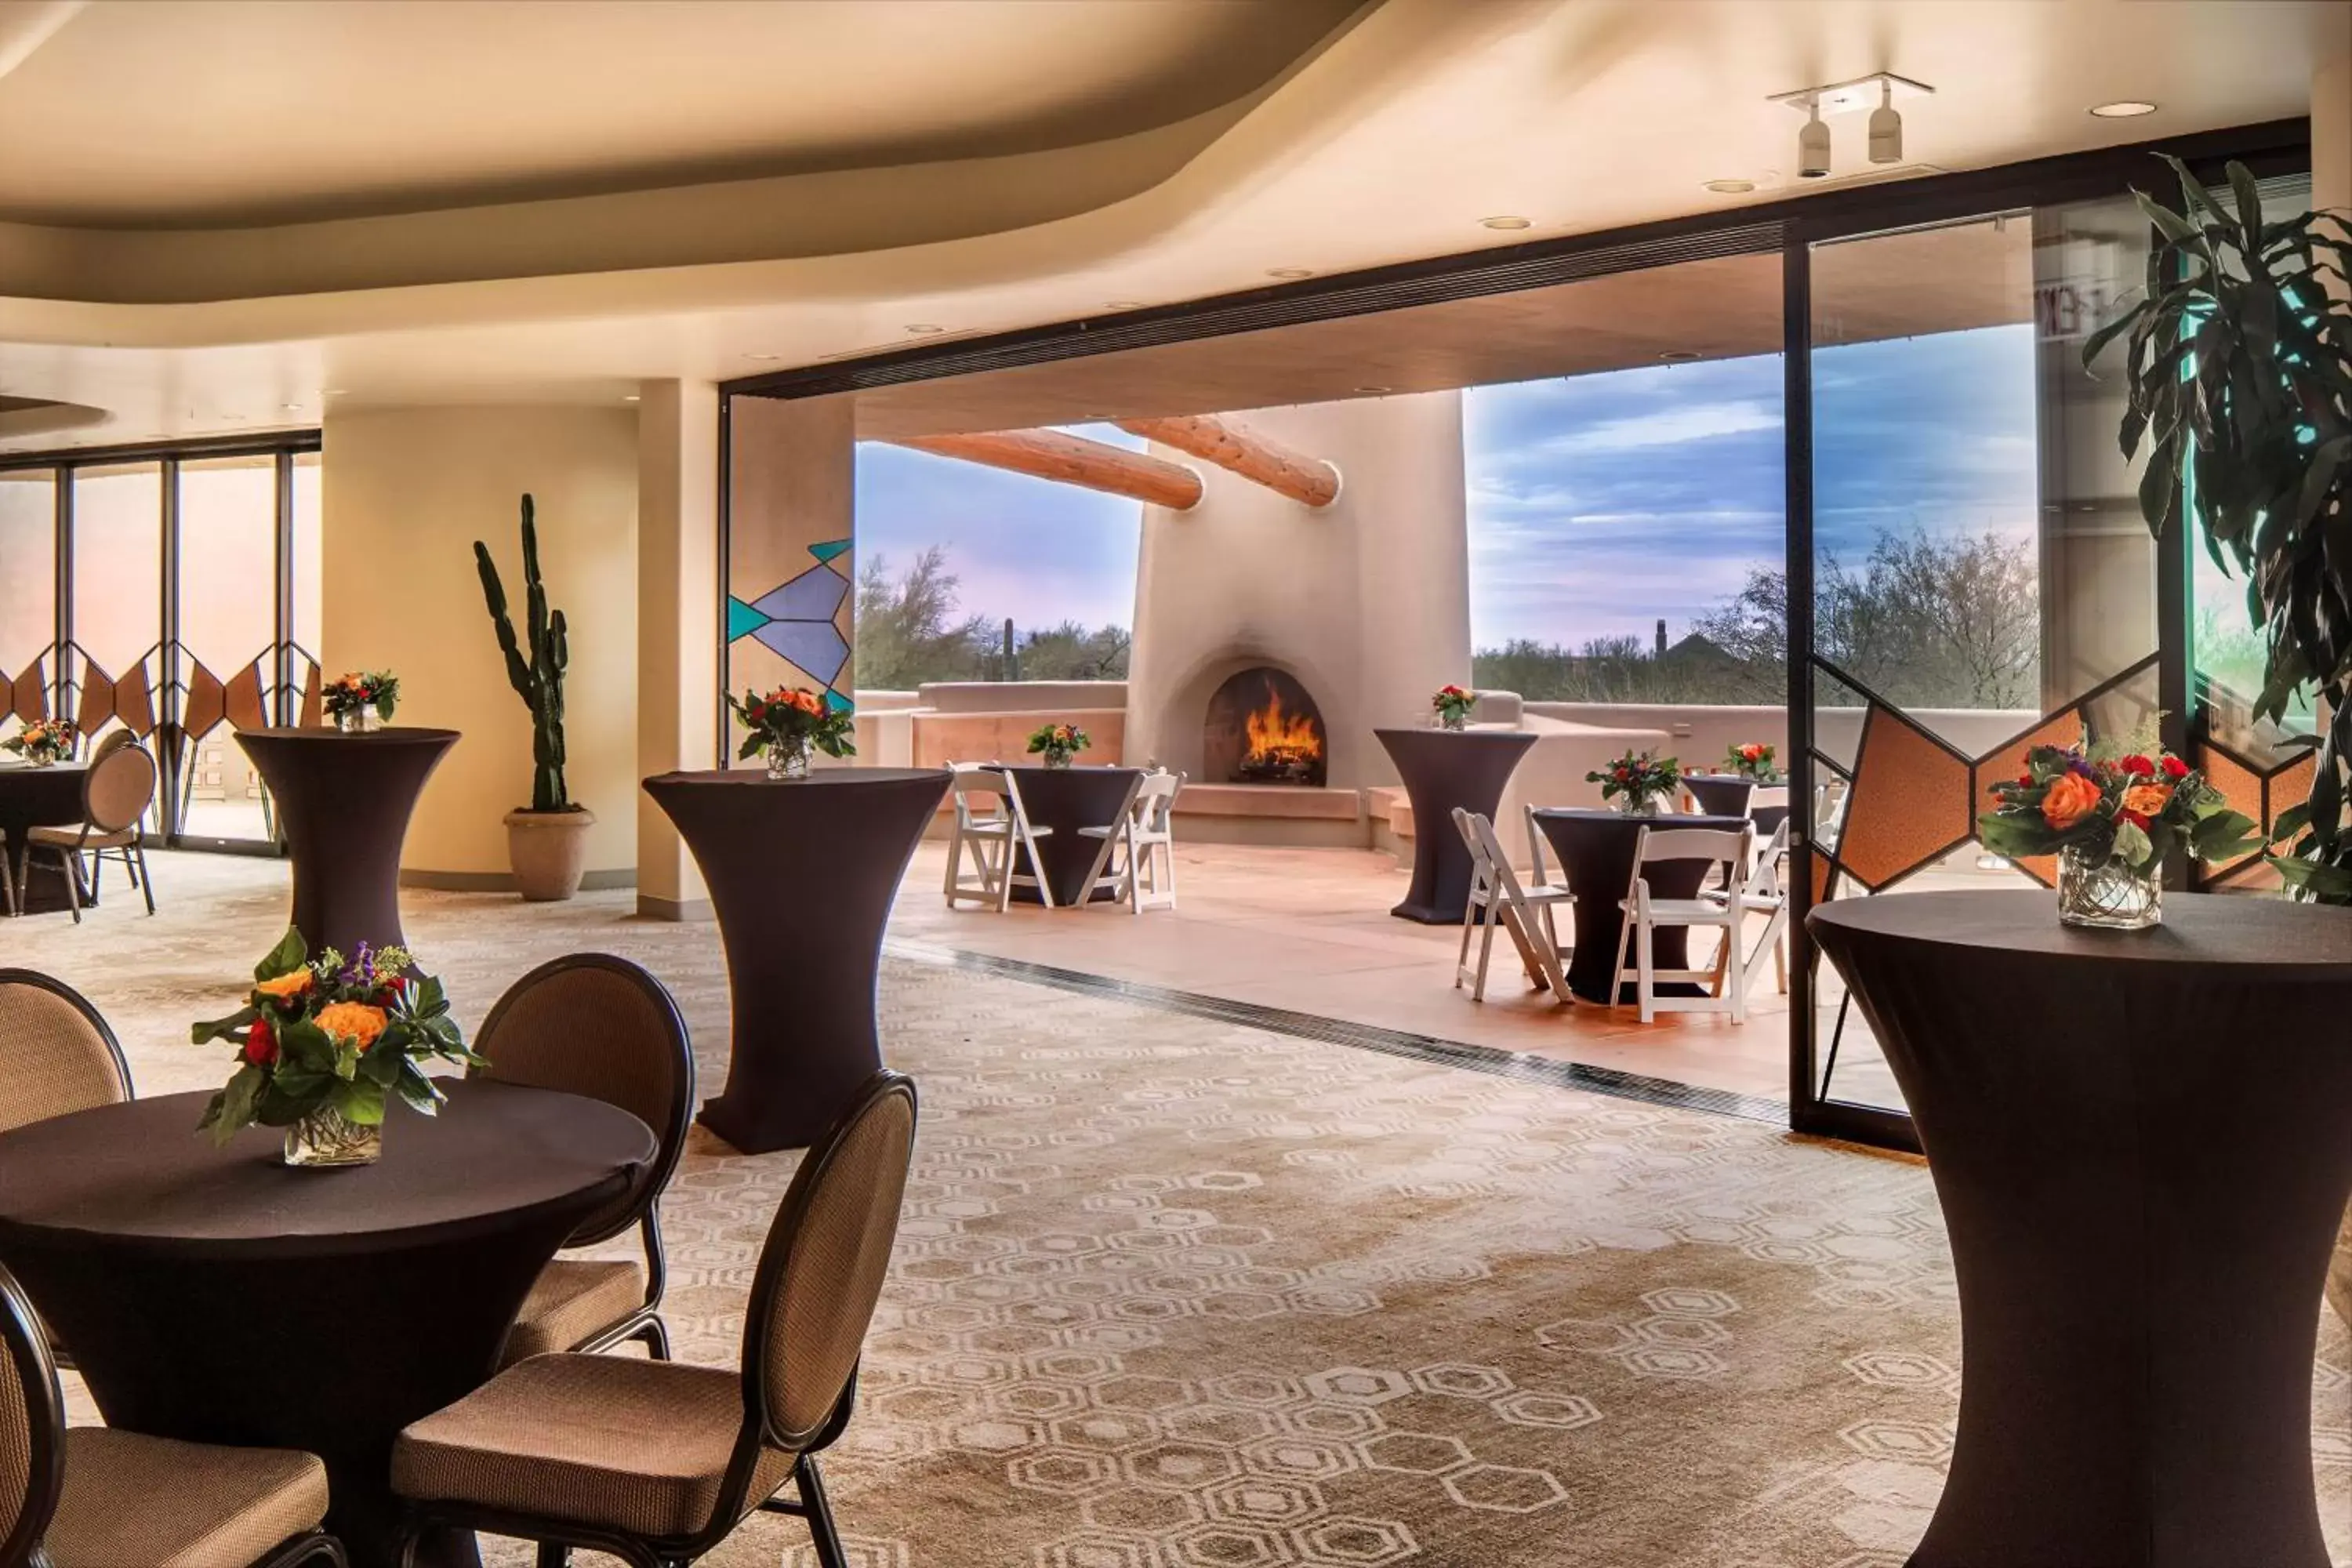 Meeting/conference room in Boulders Resort & Spa Scottsdale, Curio Collection by Hilton